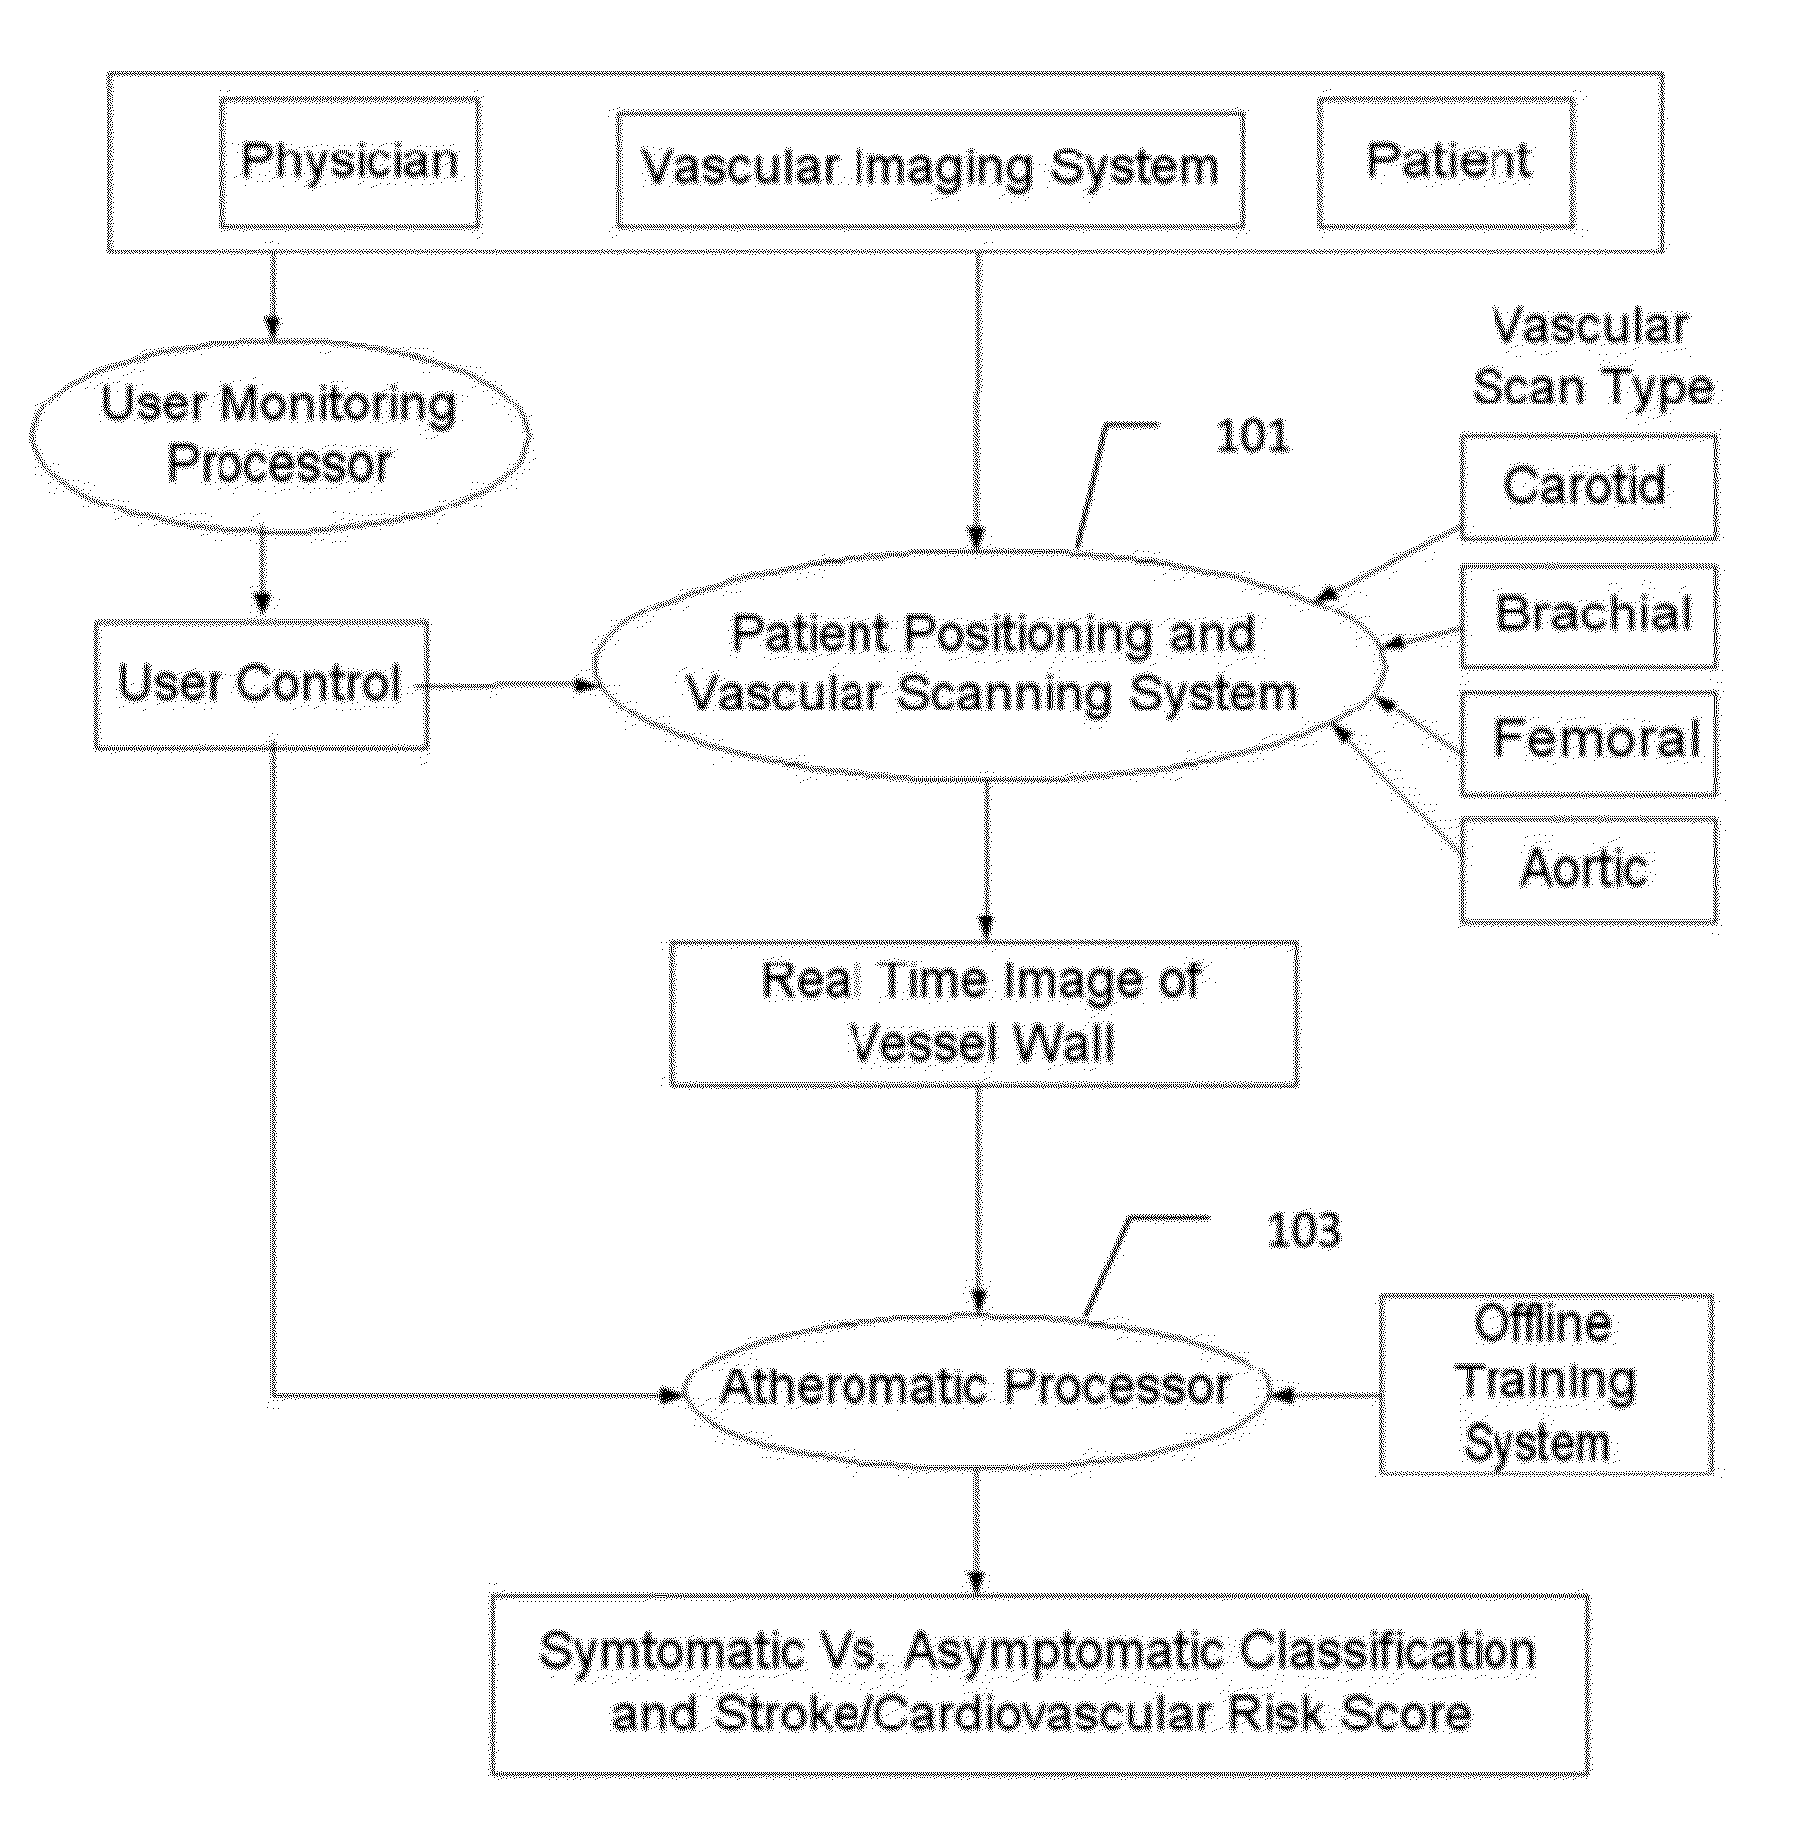 Imaging Based Symptomatic Classification Using a Combination of Trace Transform, Fuzzy Technique and Multitude of Features